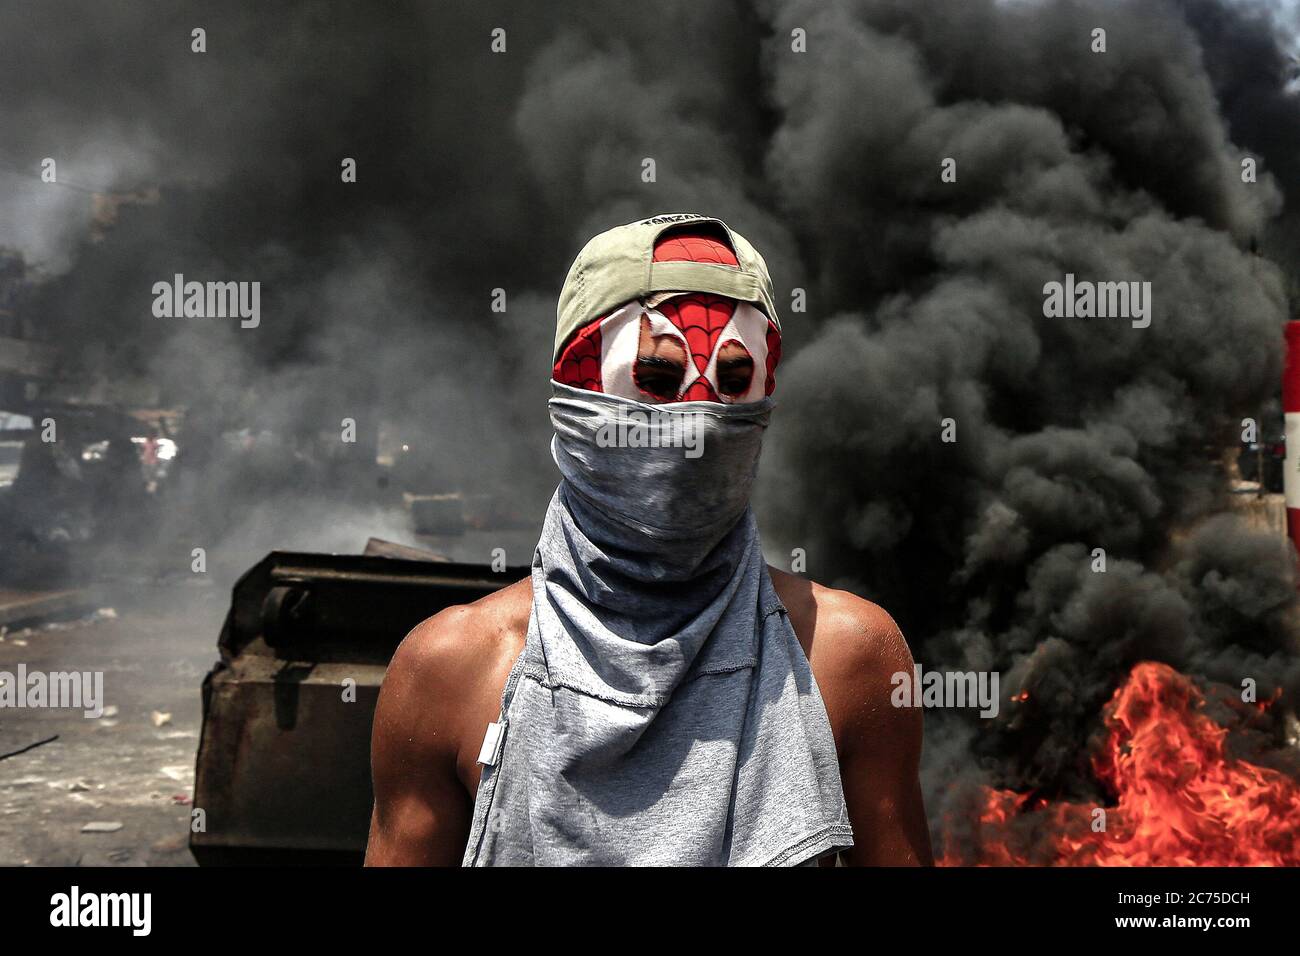 Beirut, Lebanon. 14th July, 2020. A masked demonstrator blocks the main road in Ouzai, south of Beirut by burning tyres during an anti-government protest. Credit: Marwan Naamani/dpa/Alamy Live News Stock Photo